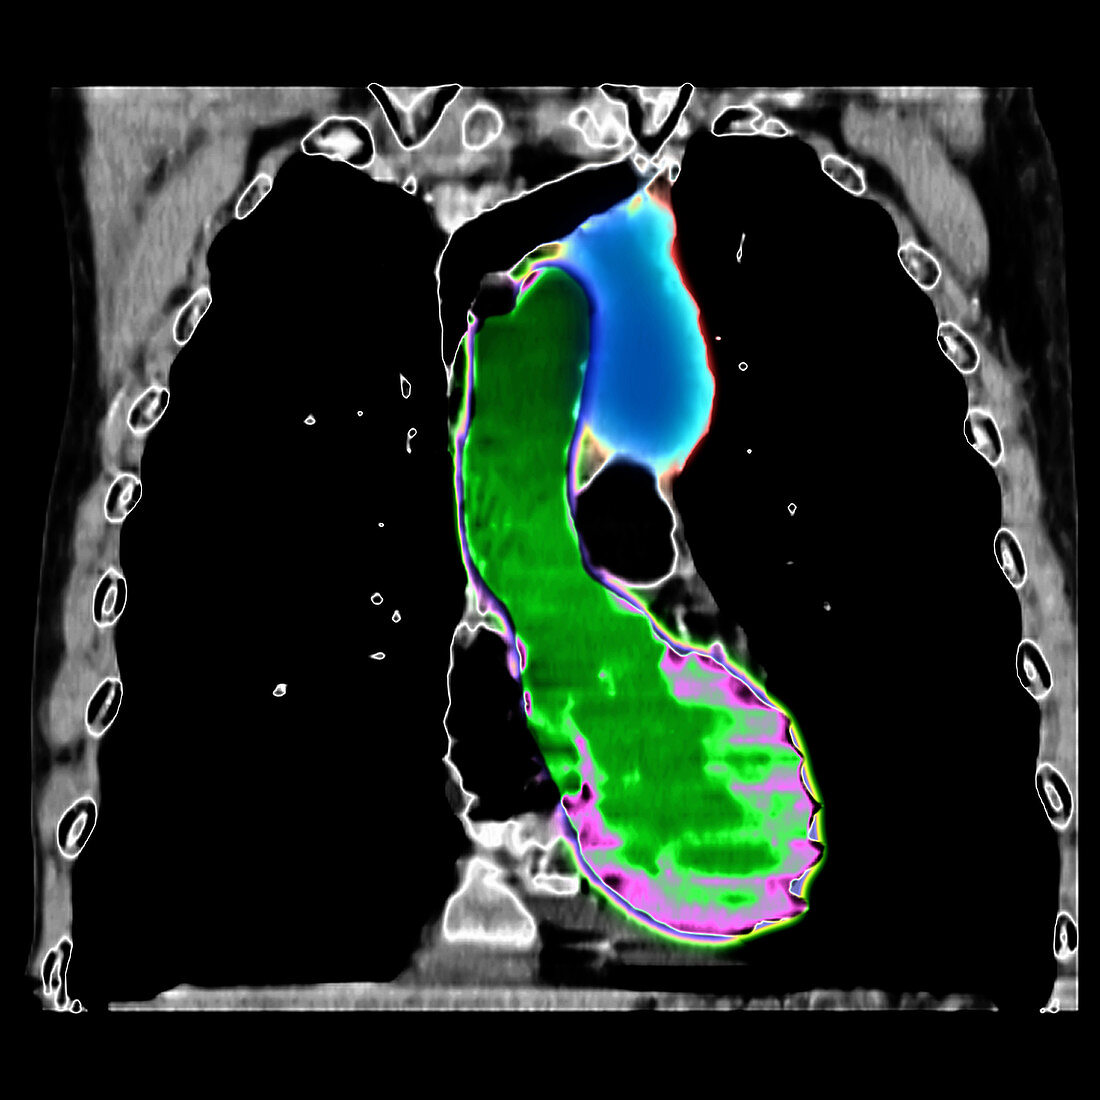 CT reconstruction of chest